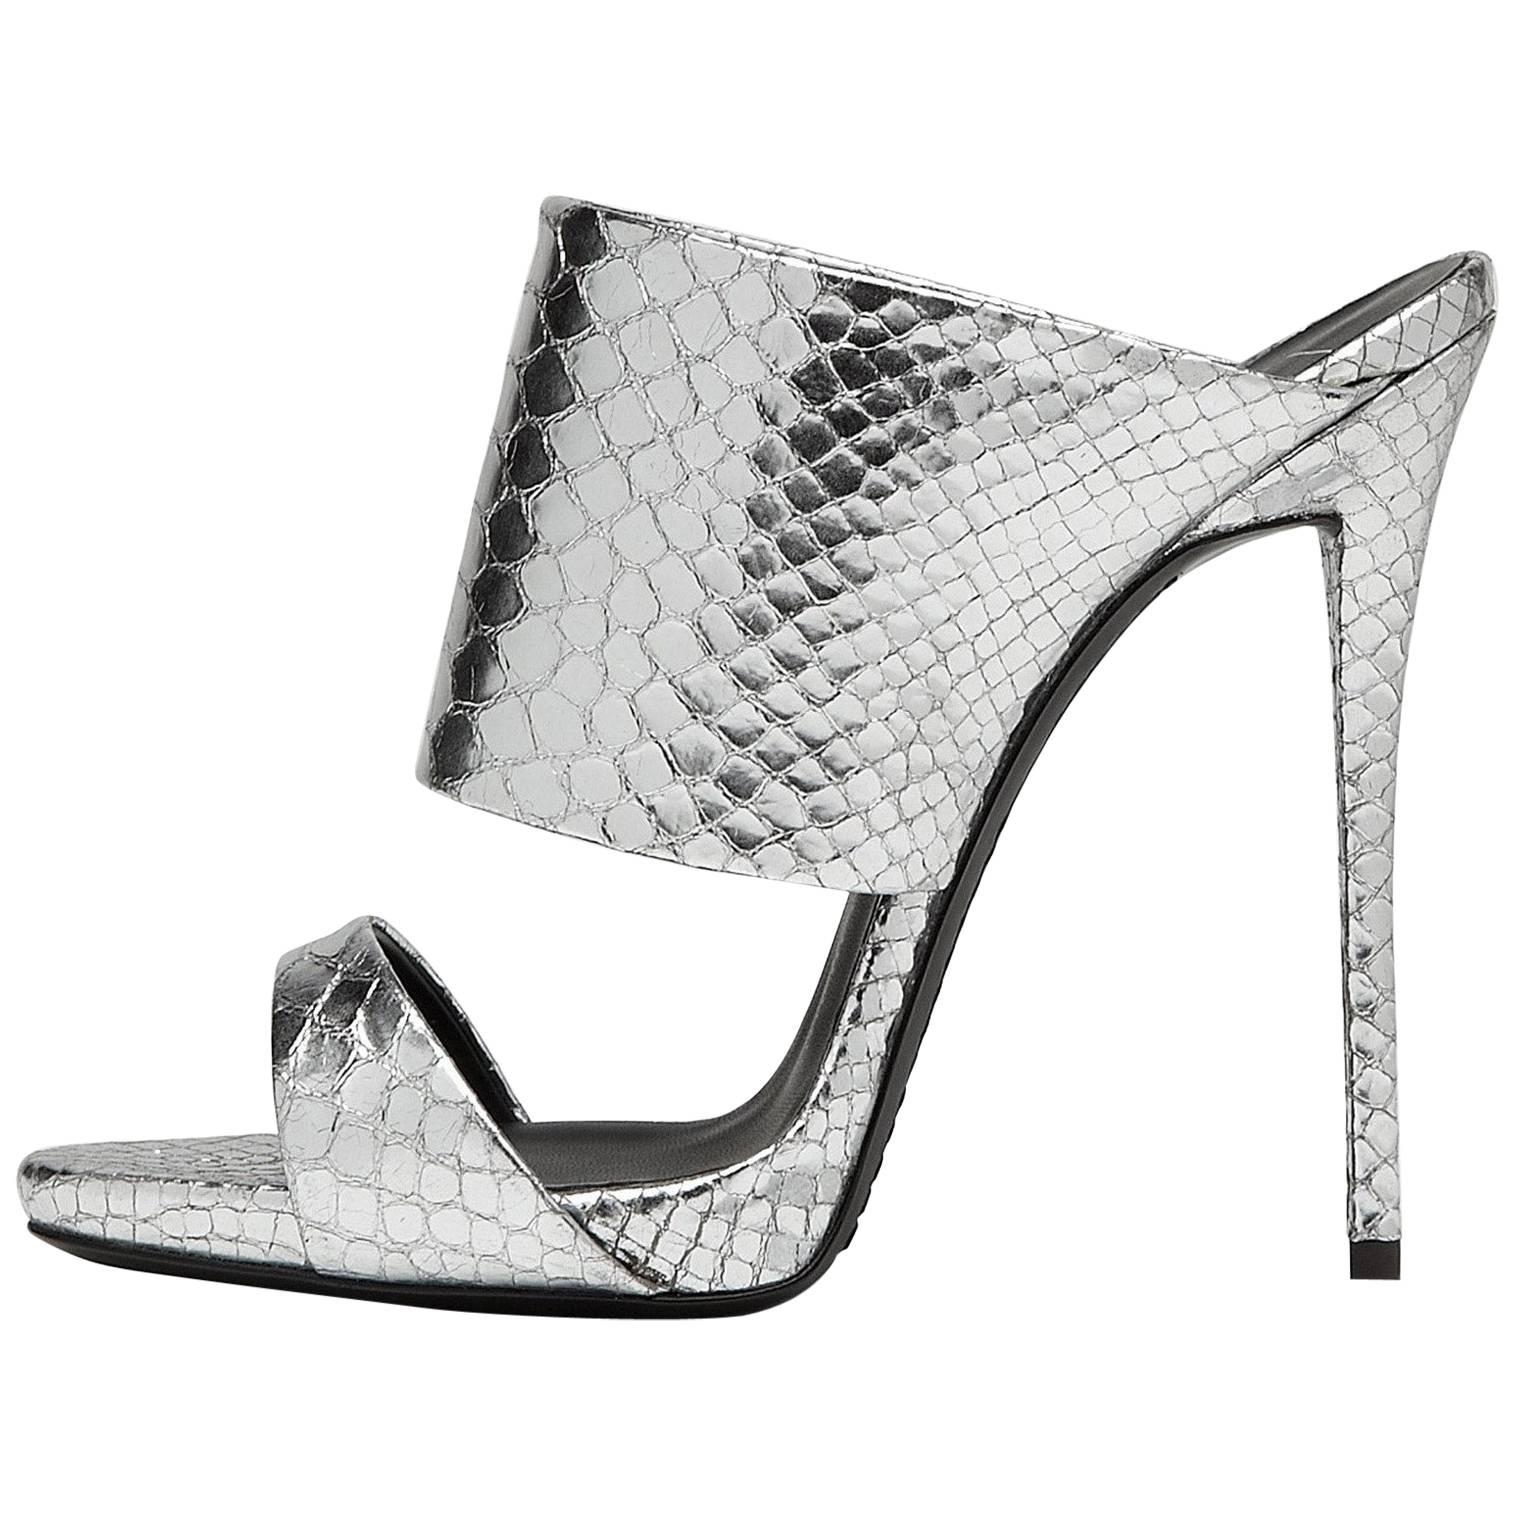  Giuseppe Zanotti New Sold Out Silver Slide In Evening High Heels Sandals in Box